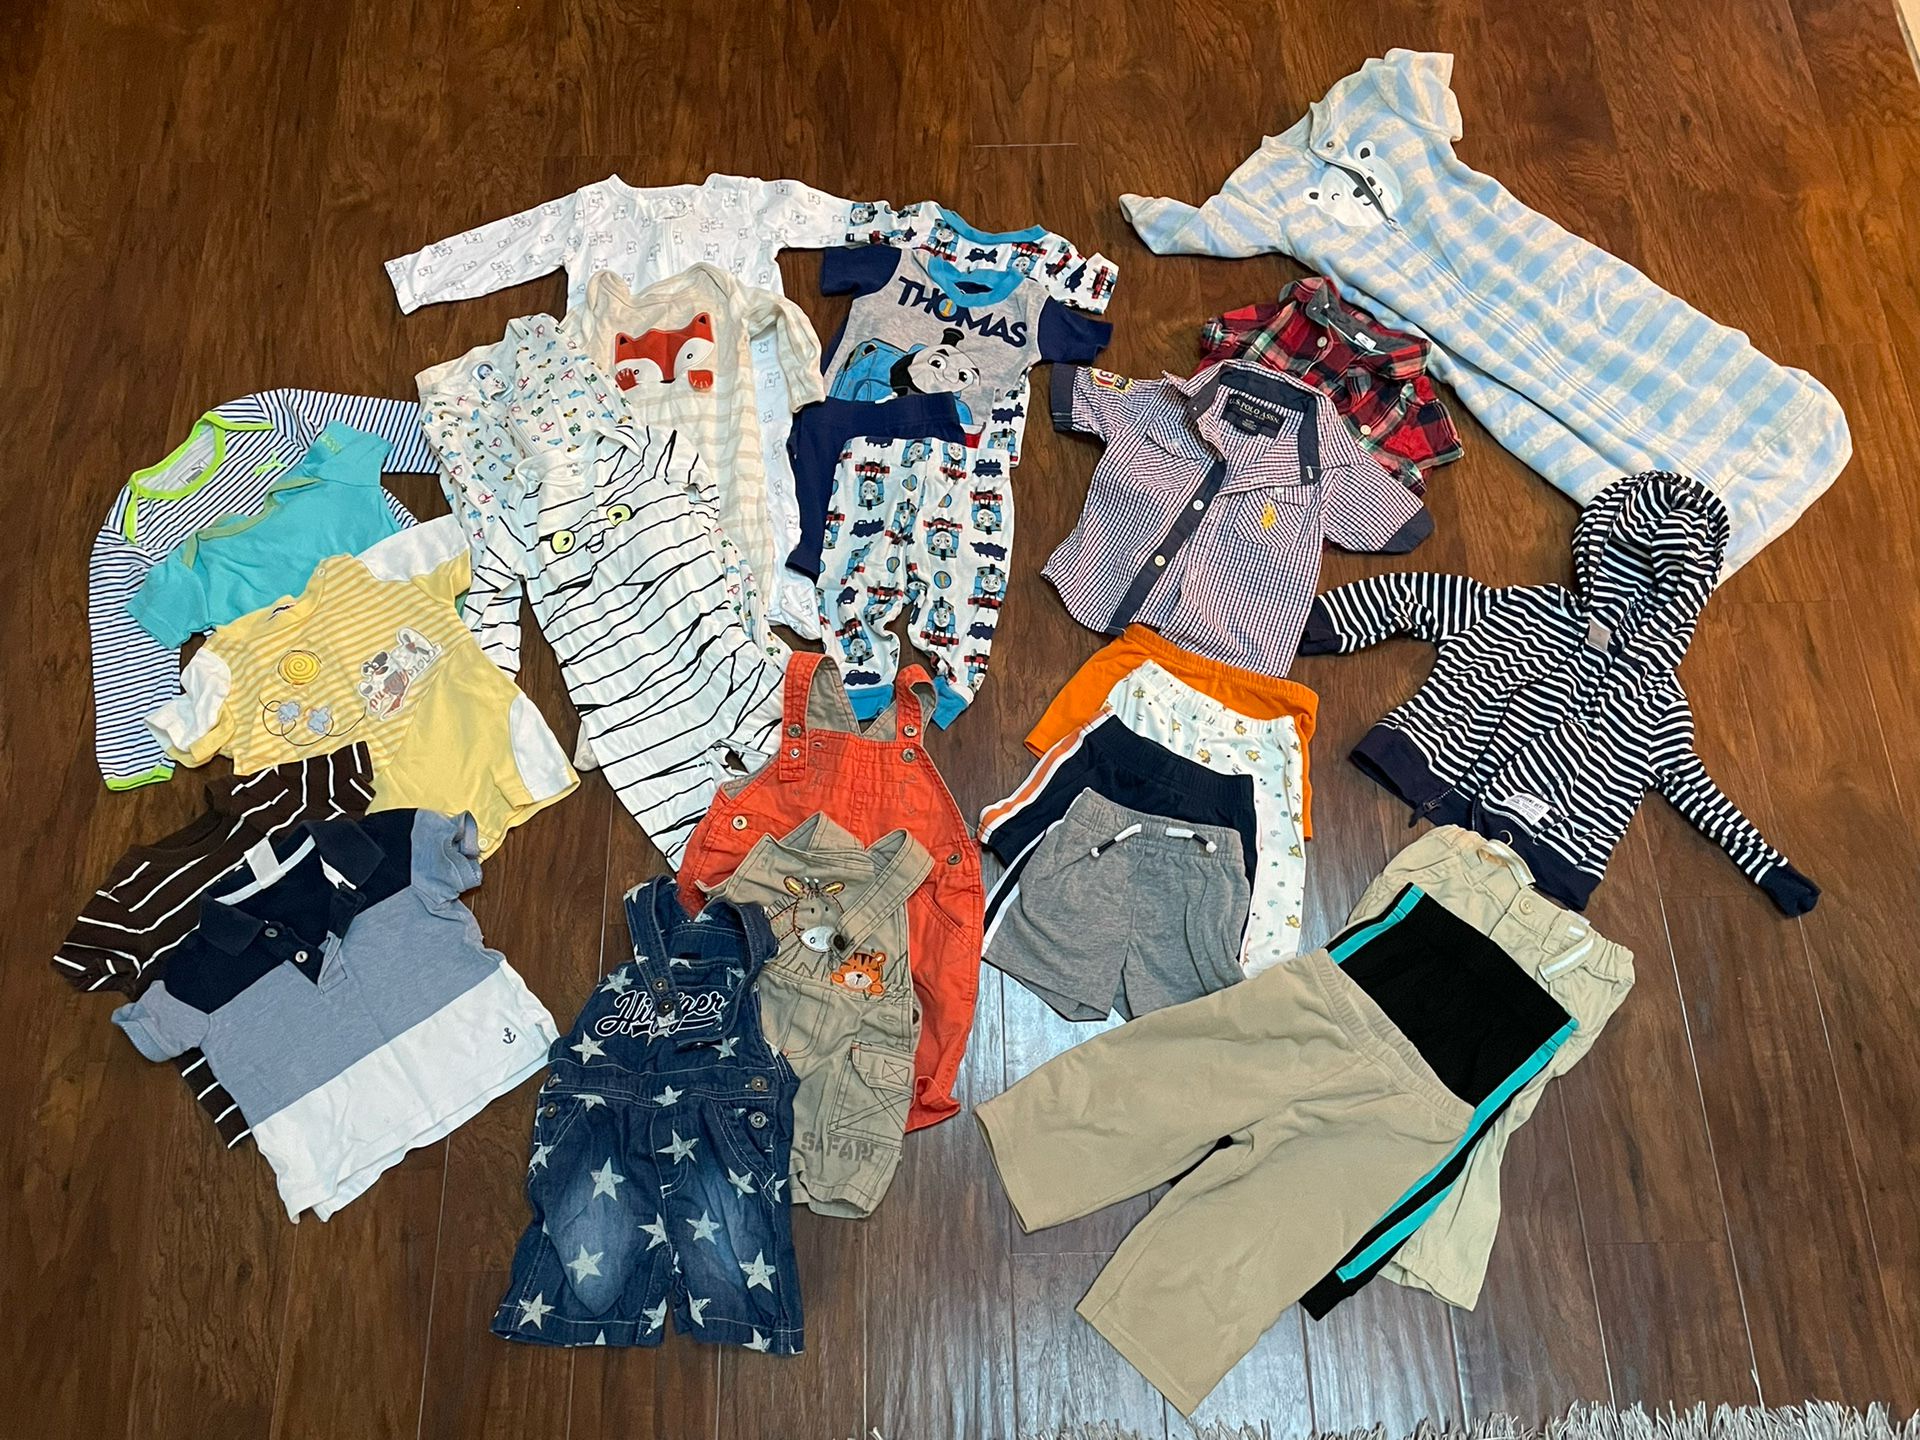 Baby Boy Size 6-9months Big Lots Of Clothes 27 Pieces Rompers Ounsies Pajamas Shirts Shorts Pants Jacket